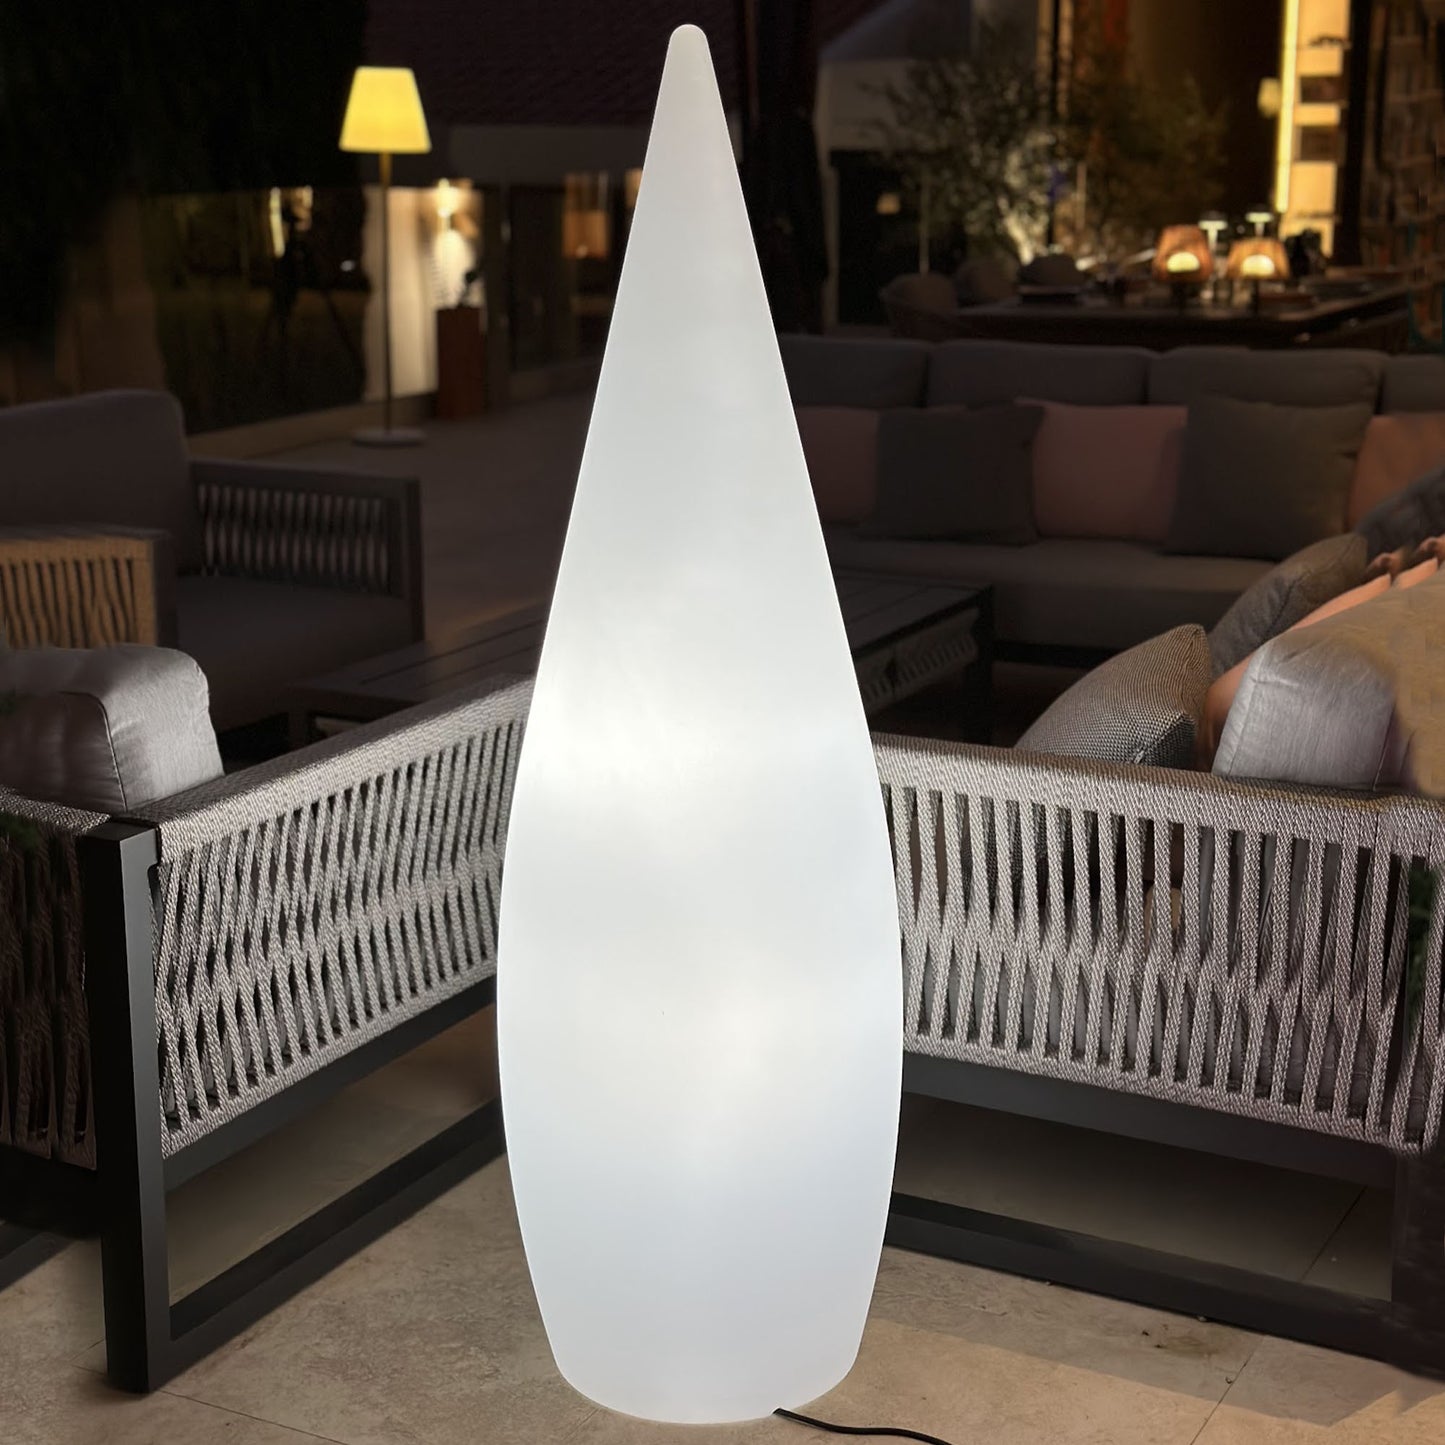 Wired drop light floor lamp for outdoor use Powerful white LED lighting CLASSY H150cm E27 base